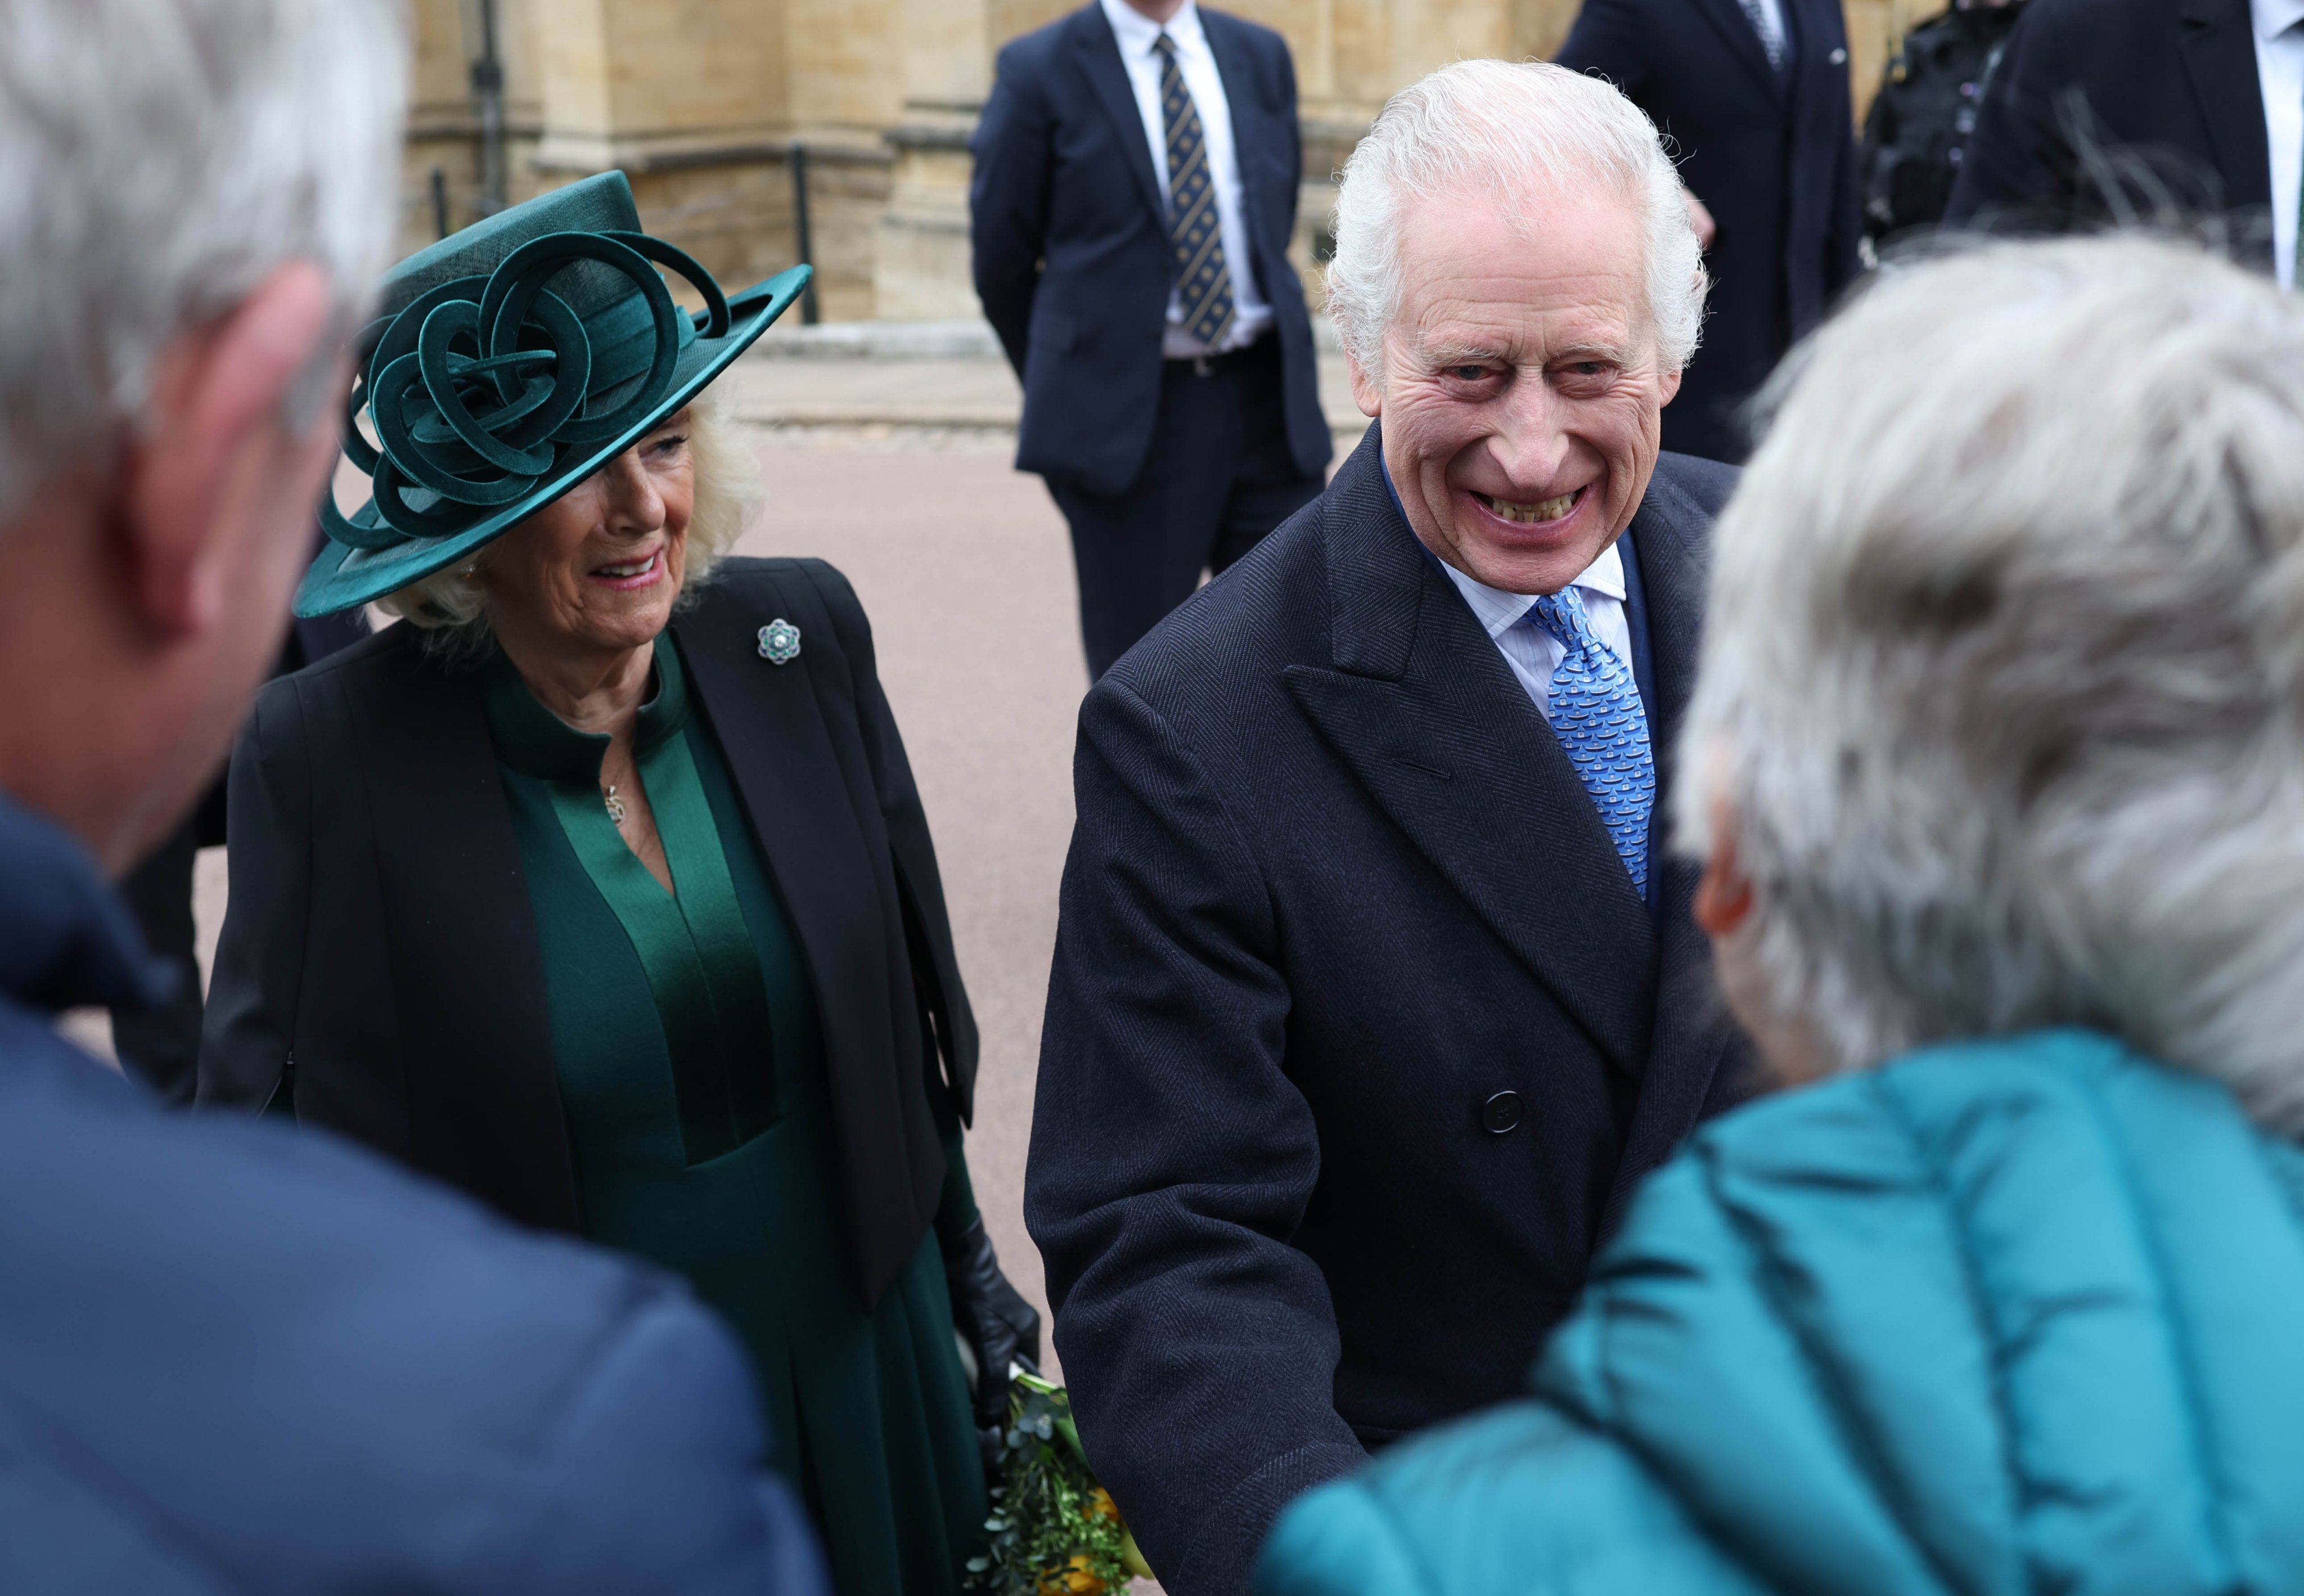 King Charles attended an Easter church service at Windsor Castle on Sunday. Photo: EPA-EFE